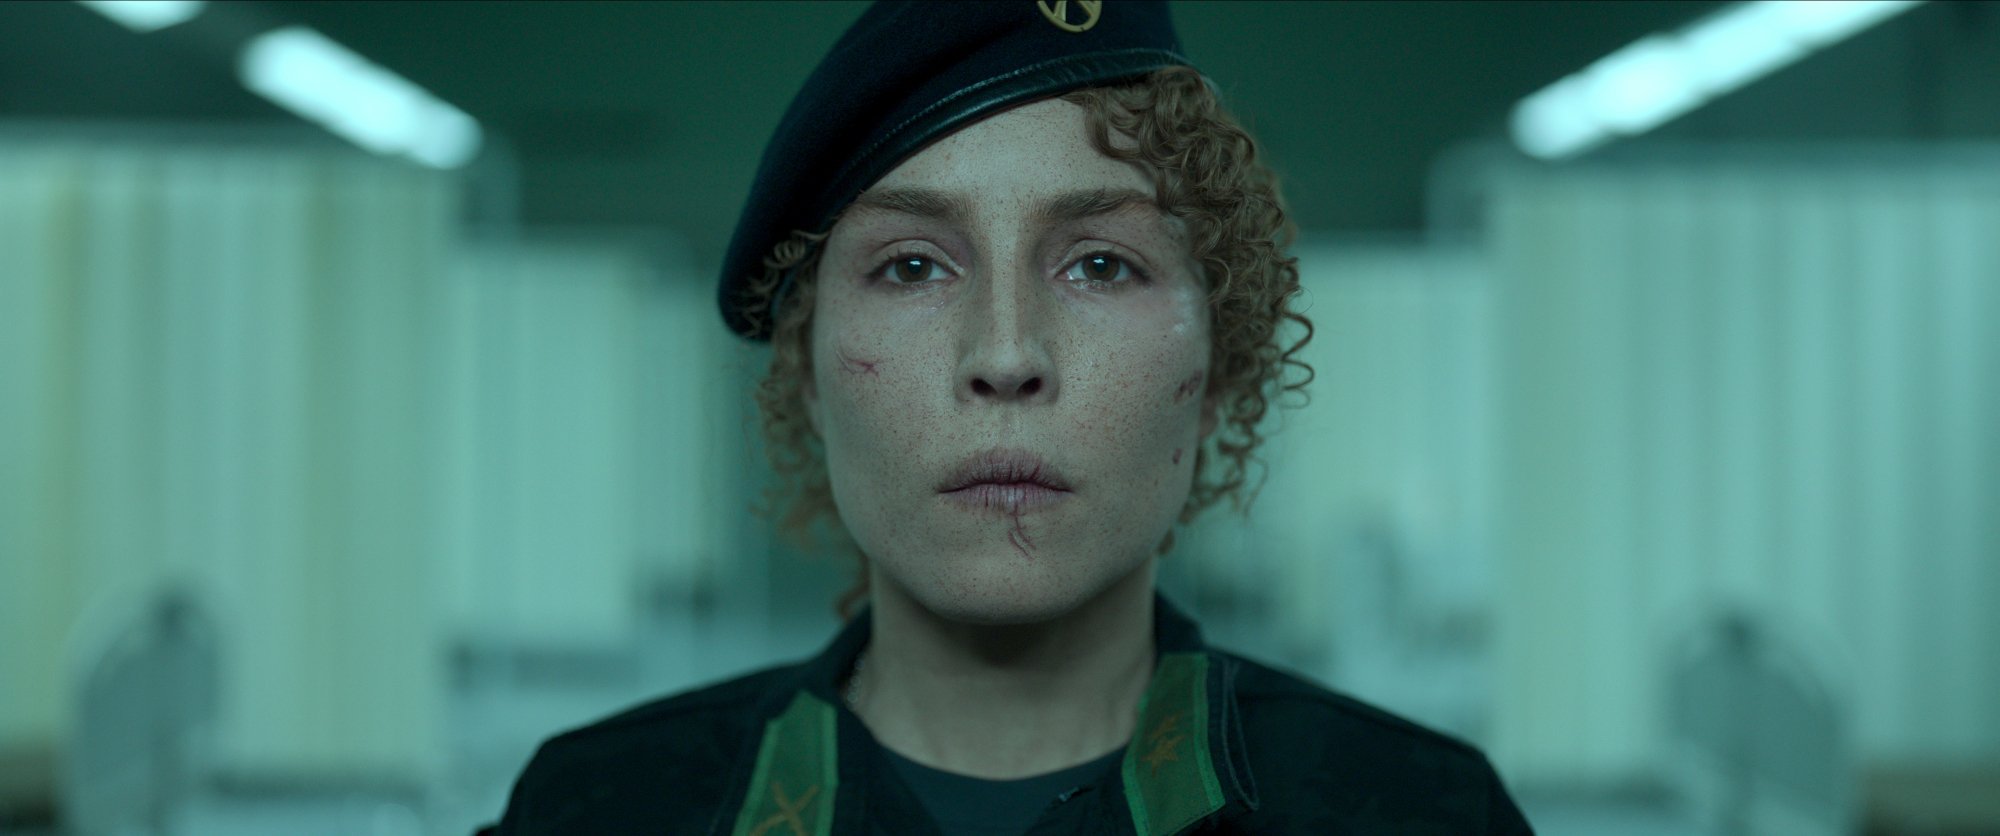 'Black Crab' Noomi Rapace as Caroline Edh looking straight ahead with cracked lips and a military hat